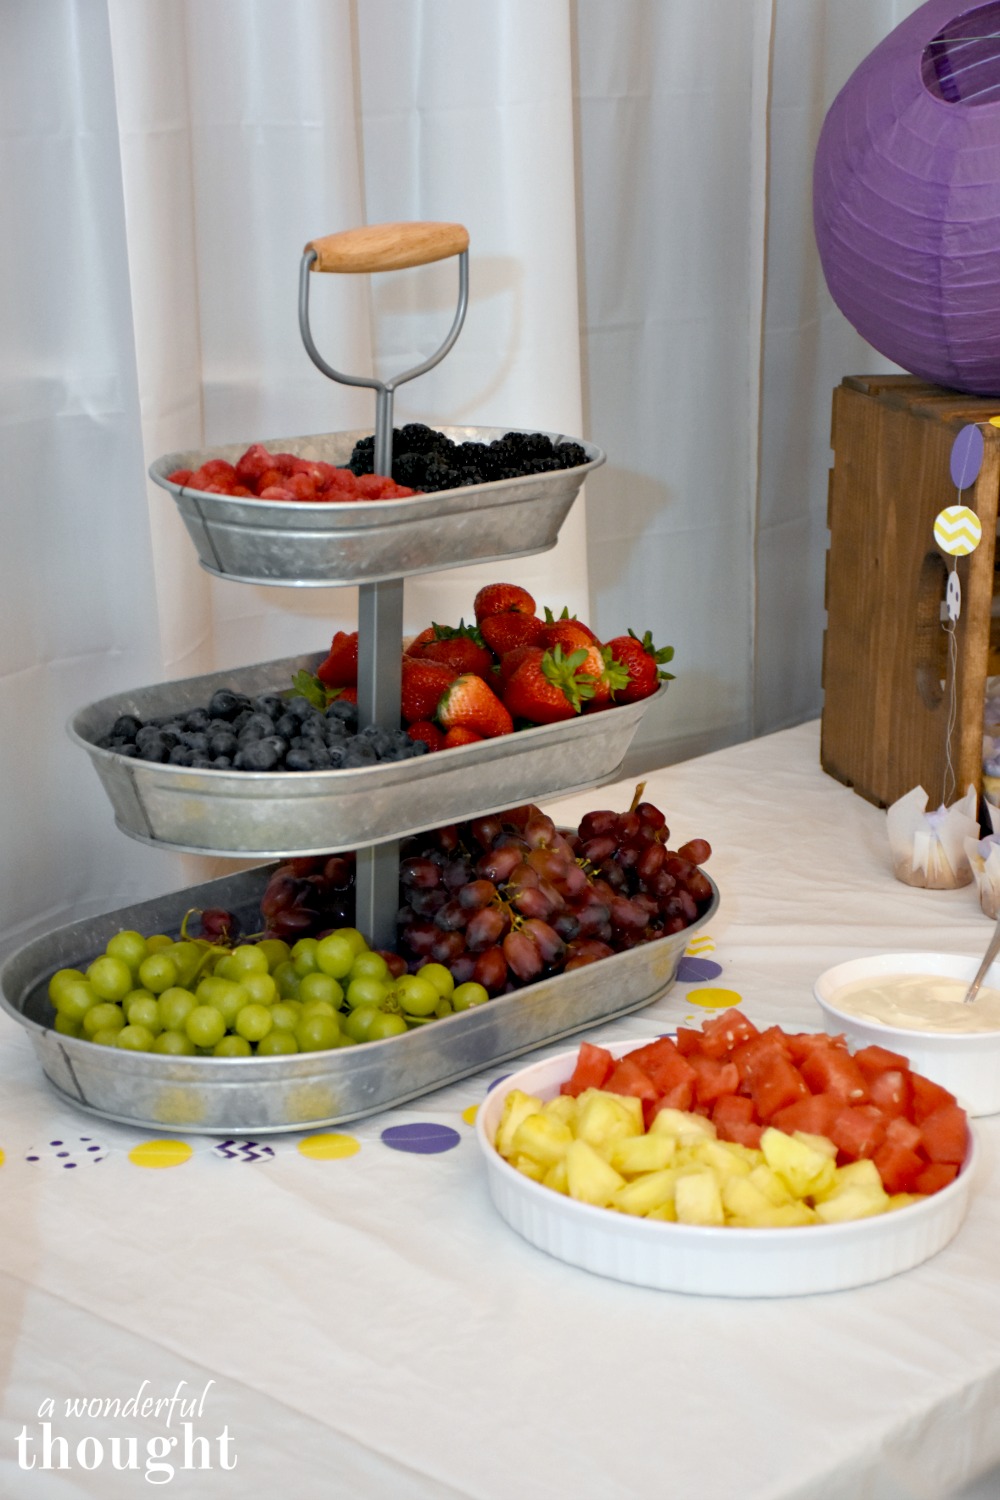 Graduation Party Ideas | Garage Party #graduationparty #graduationdecor #graduationfood #partyideas #partydecor #awonderfulthought